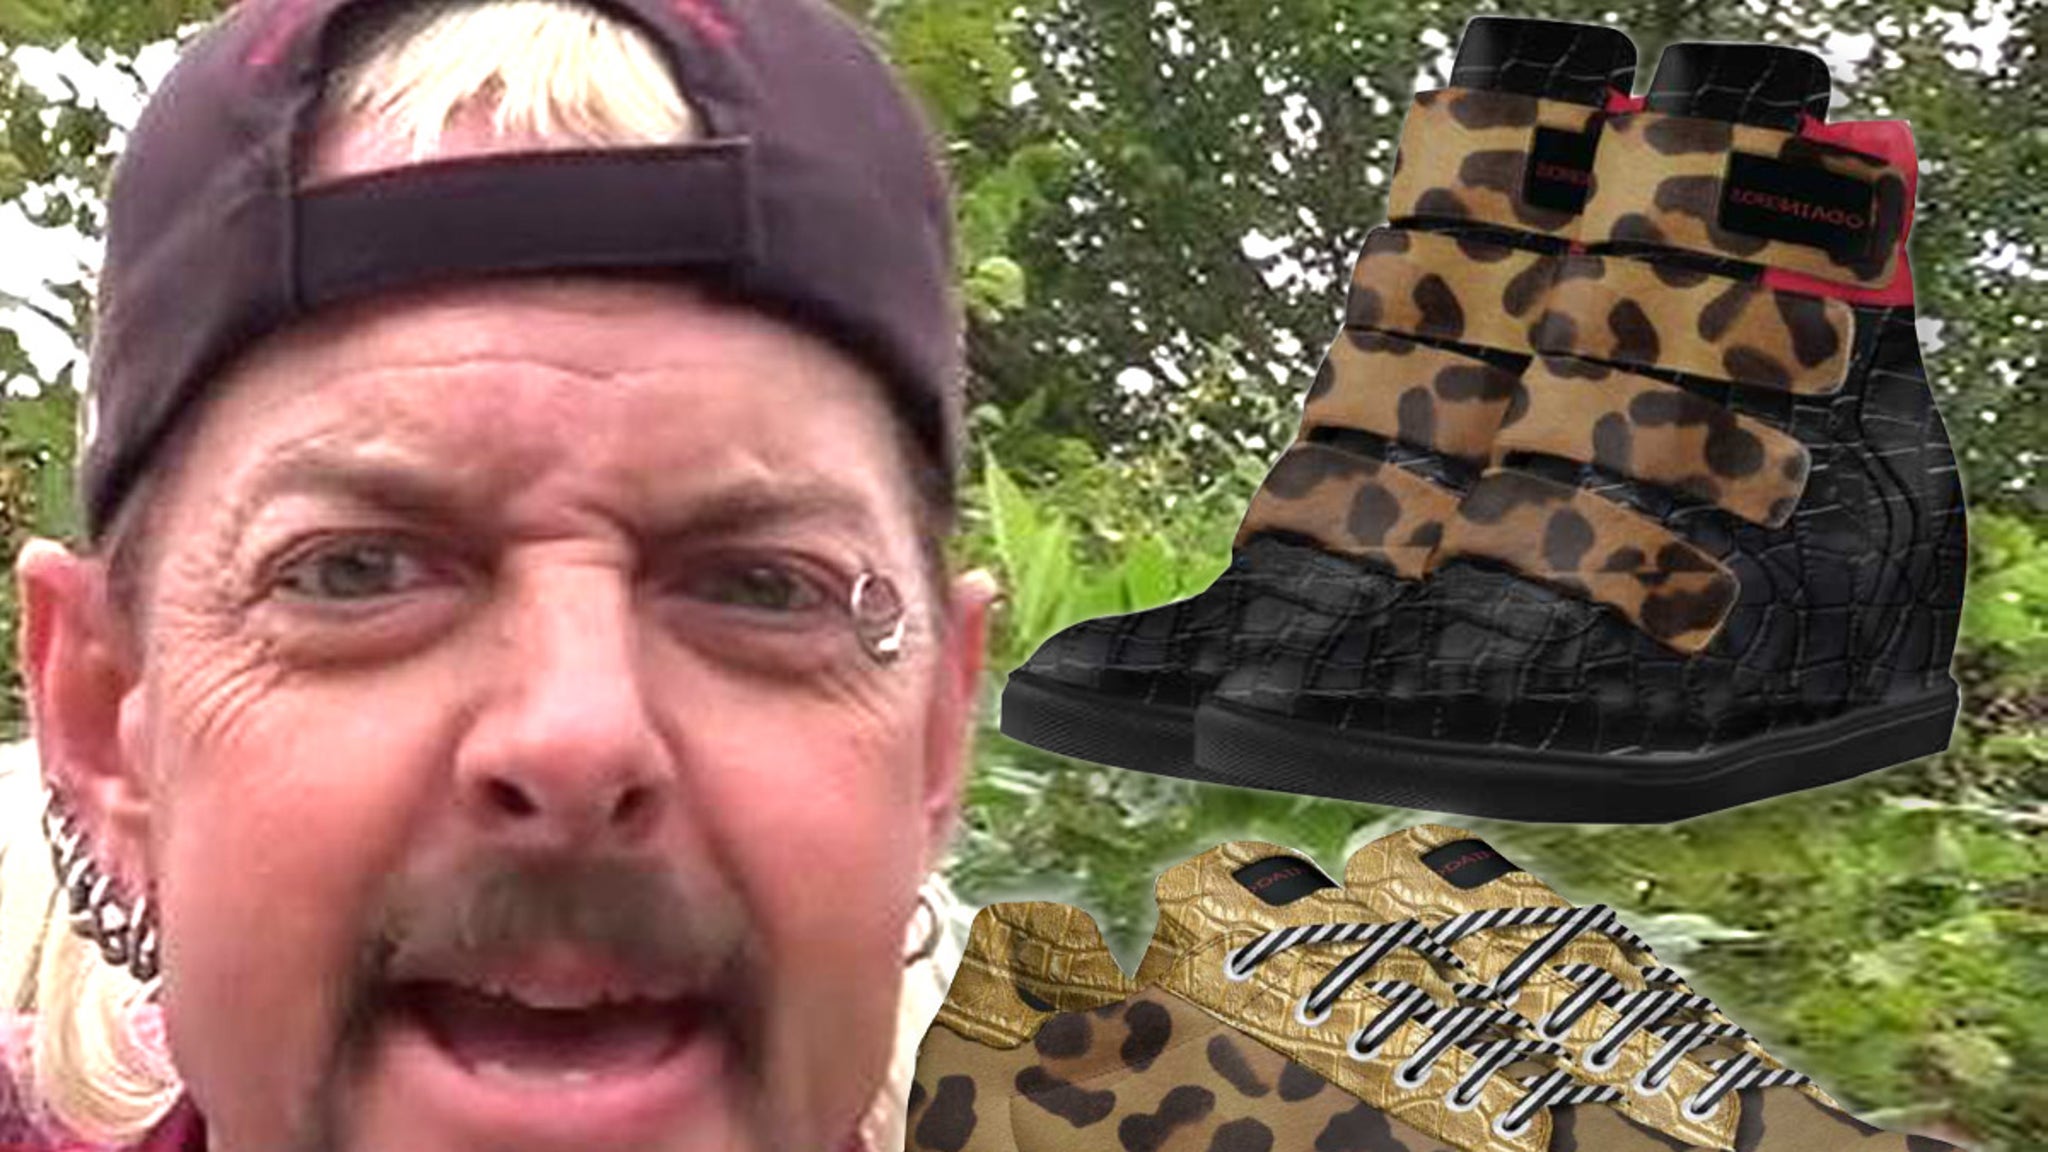 Joe Exotic launching the shoe line for ‘Tiger King’ birthday